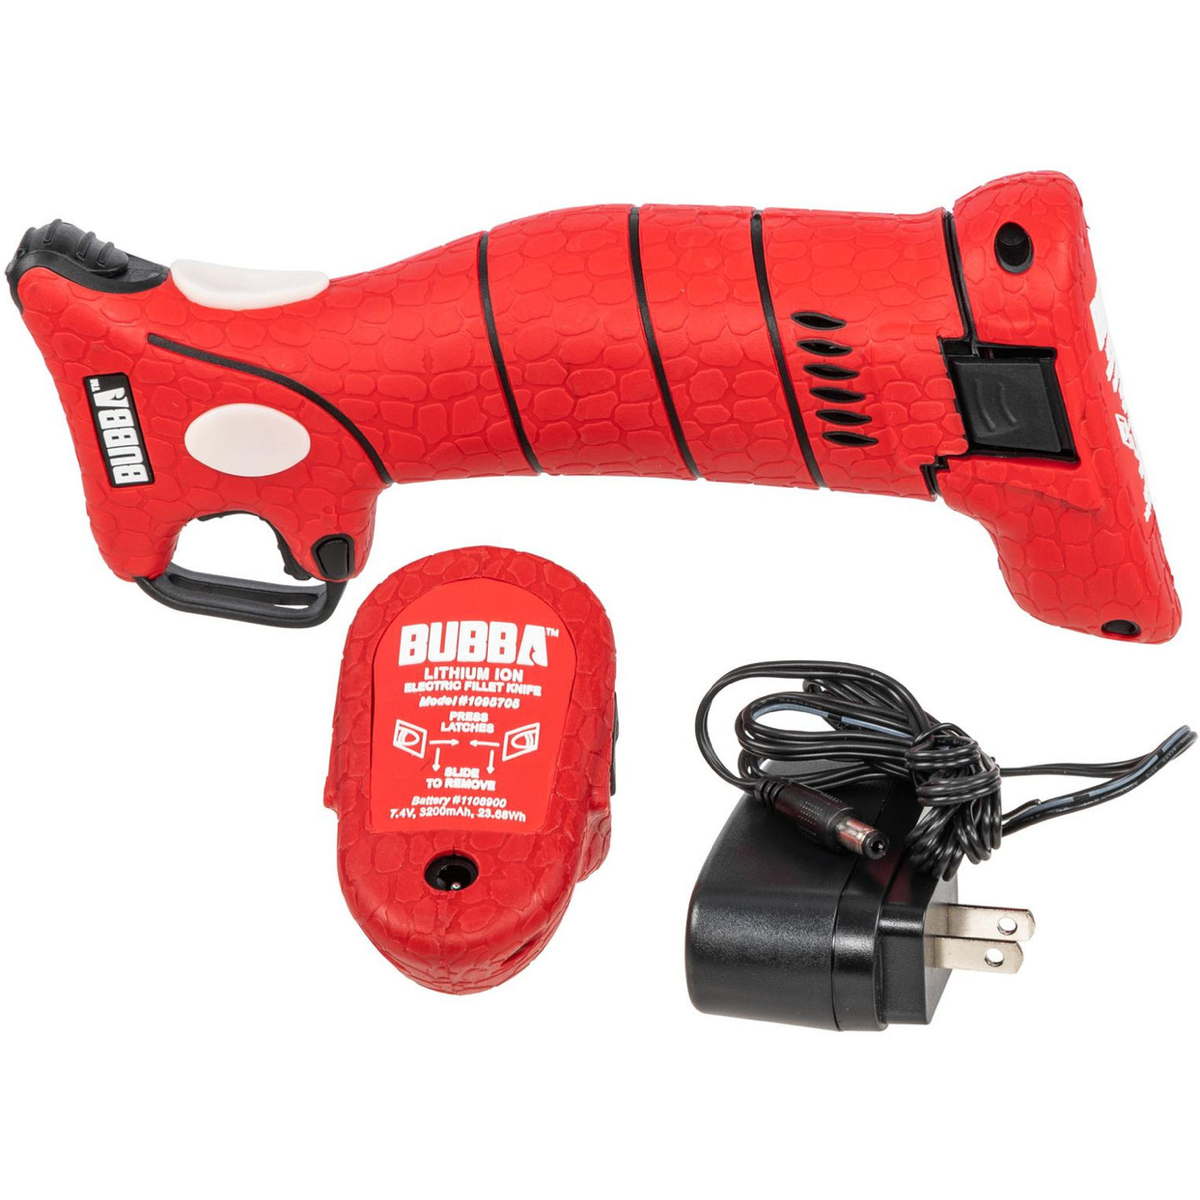 Photo of Bubba Cordless Electric Fillet Knife (rechargeable battery/handle) for sale at United Tackle Shops.